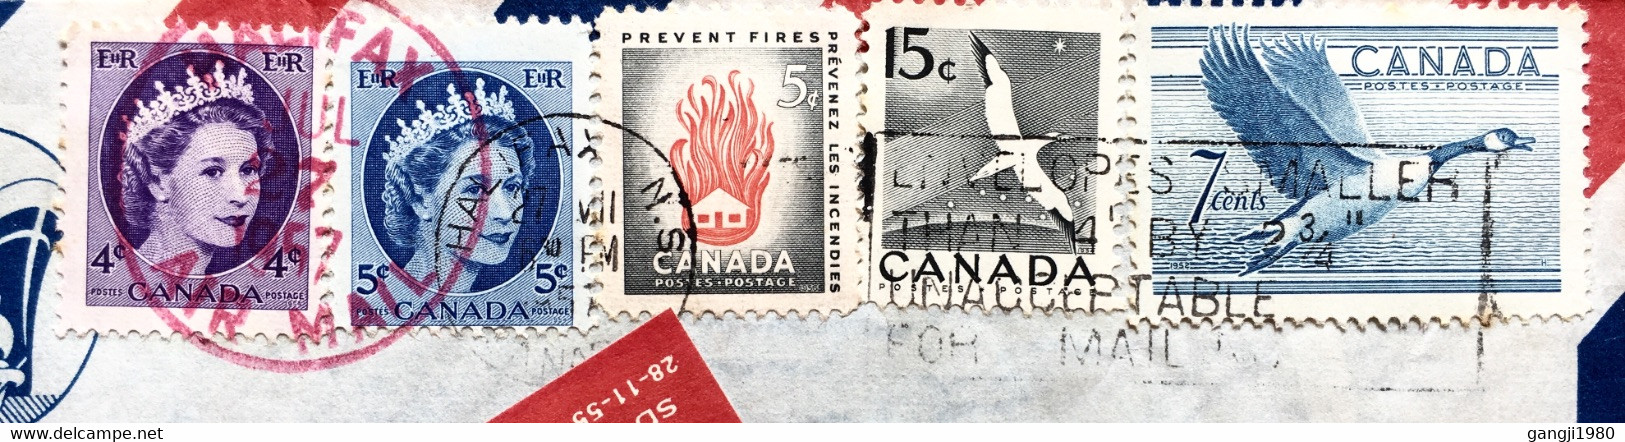 CANADA TO USA USED COVER 1957, VIGNETTE “SPECIAL DELIVERY EXPRESS” 1955 PRINT “HOLLAND-AMERICA LINE” HALIFEX RED CANCEL. - Luchtpost: Expres